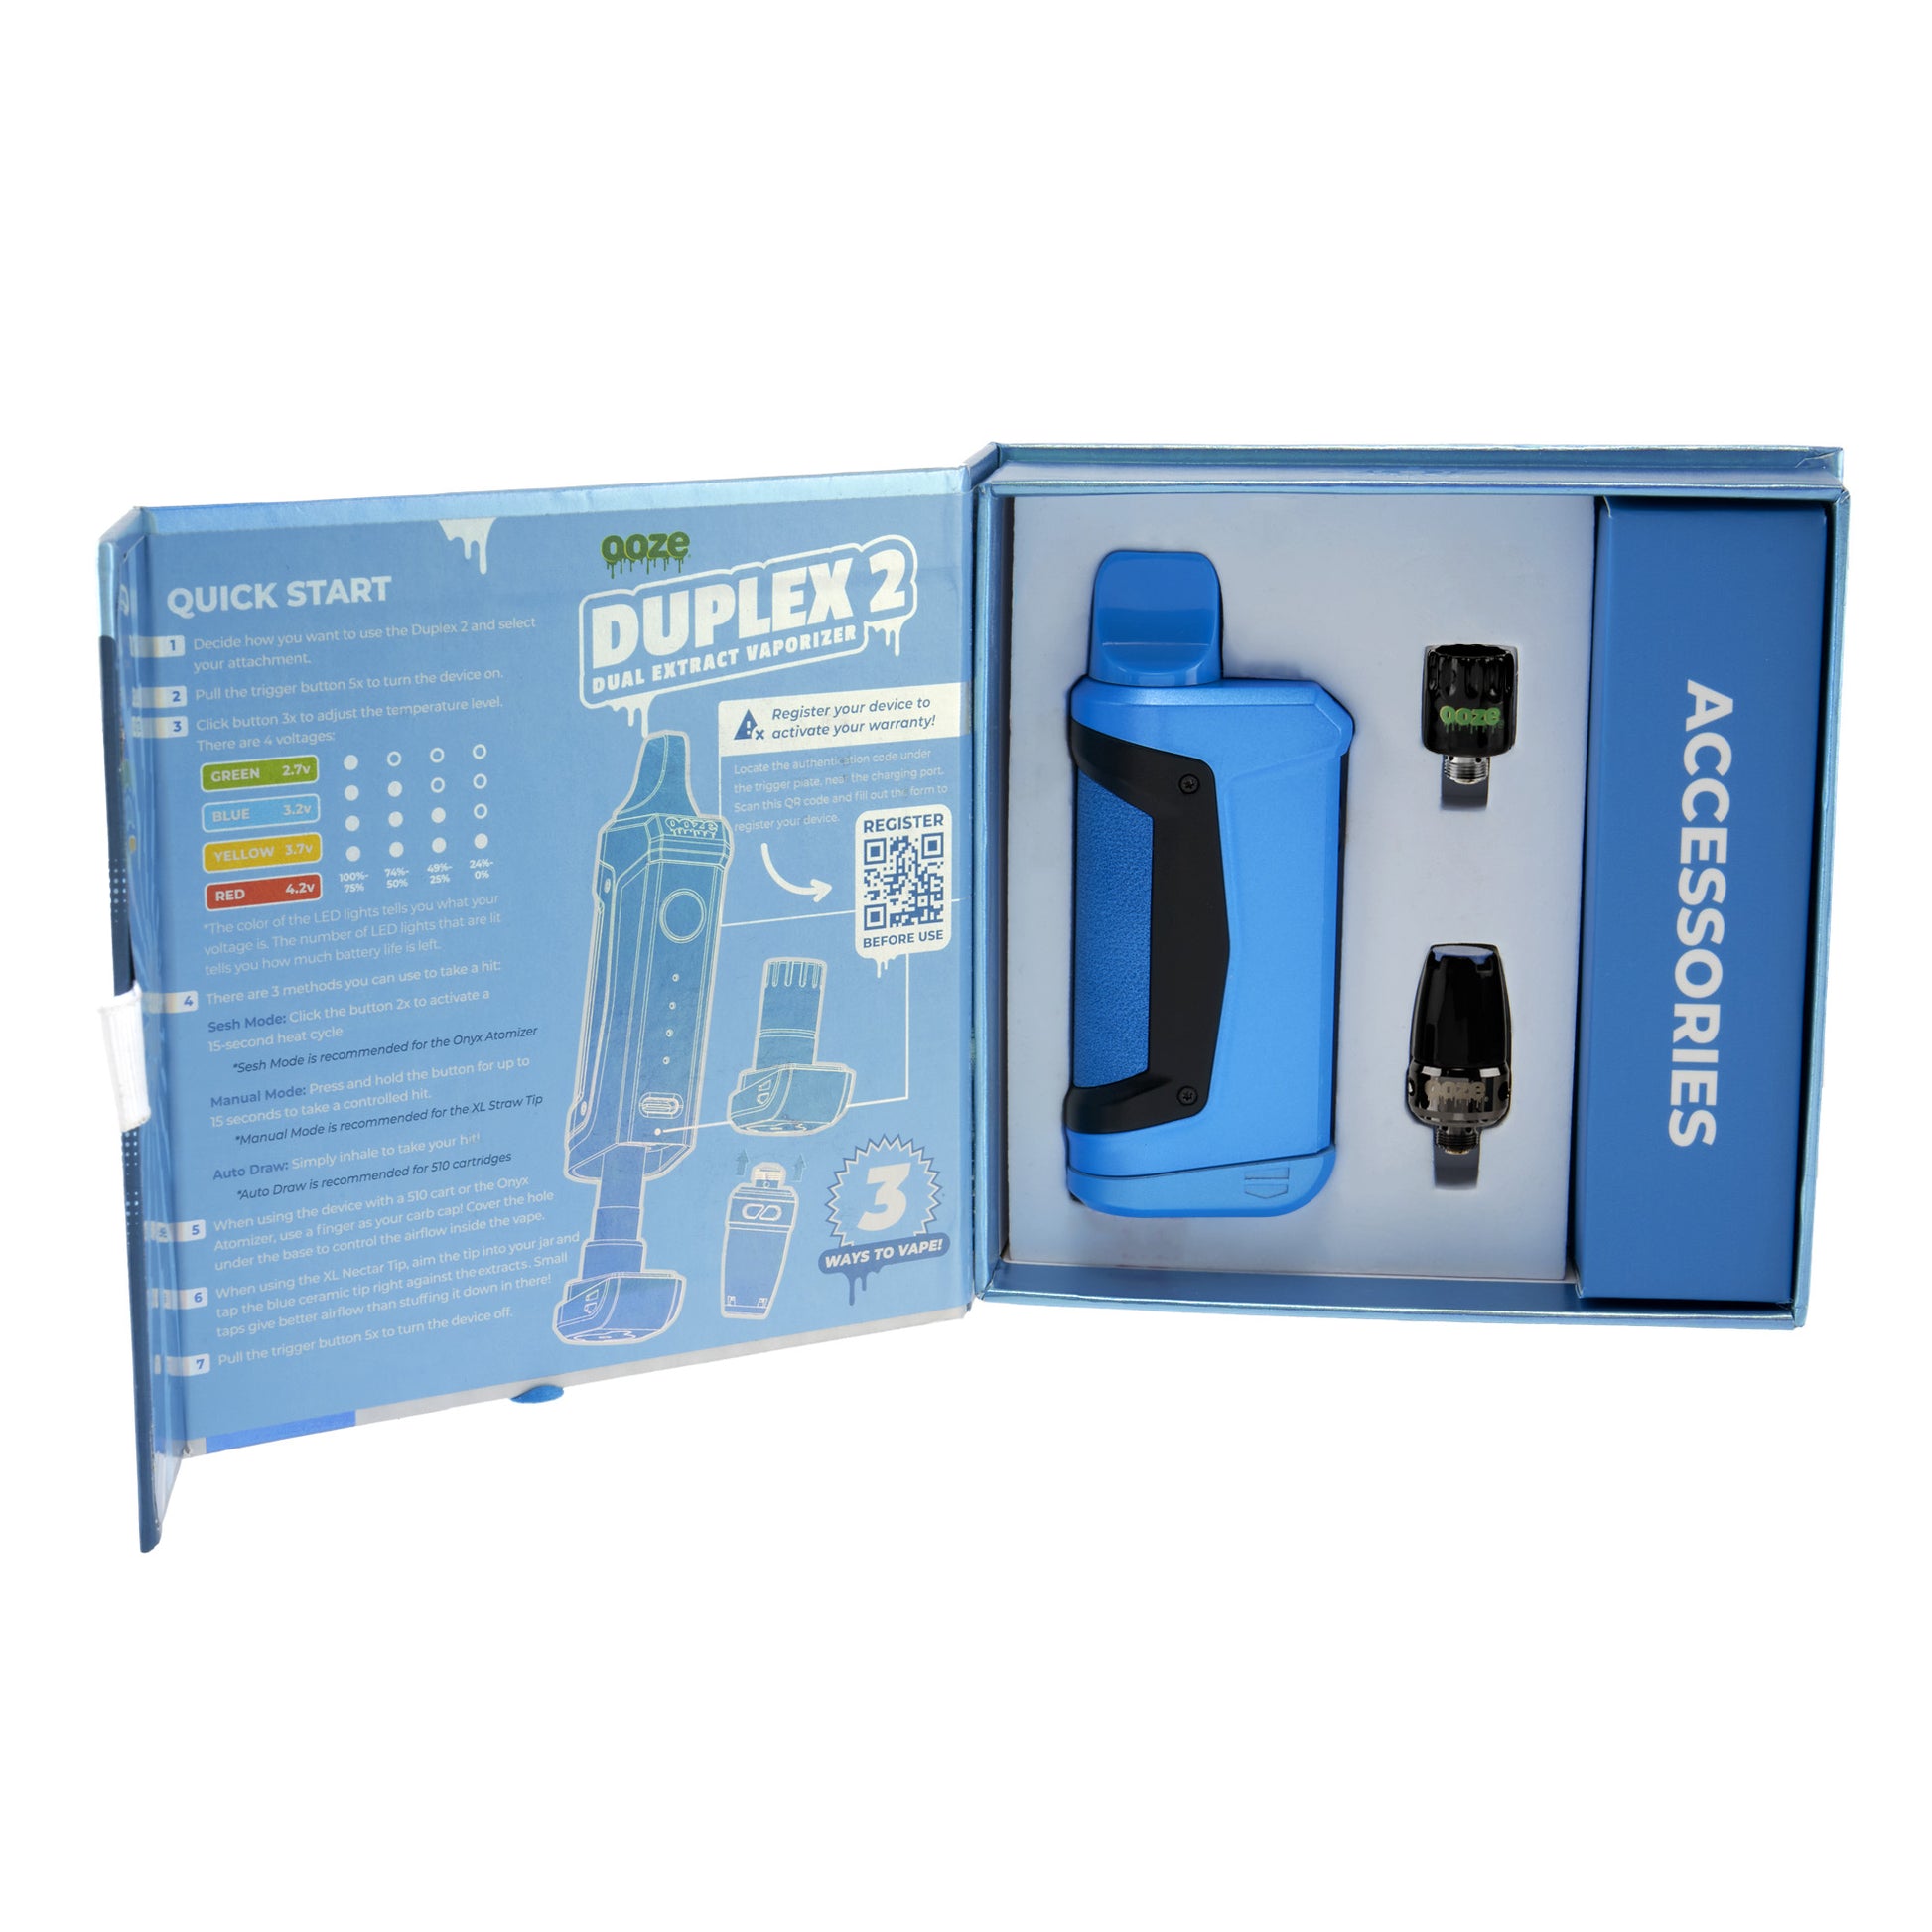 The arctic blue Ooze Duplex 2 extract vaporizer is shown in the box